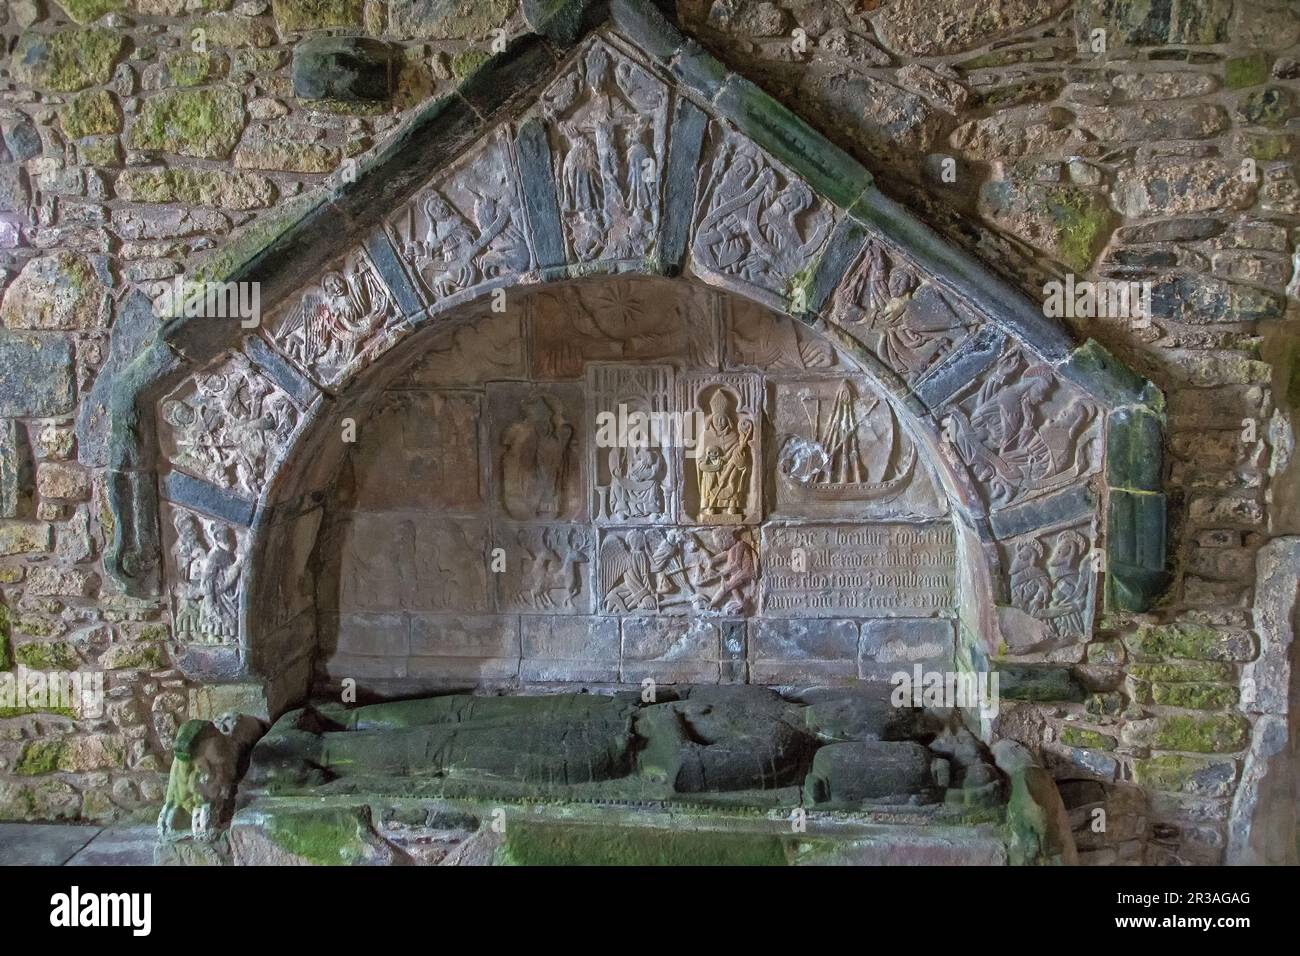 Alasdair Crotach's Wall Tomb, St Clement’s Church, Rodel, Harris, Isle of Harris, Hebrides, Outer Hebrides, Western Isles, Scotland, United Kingdom Stock Photo